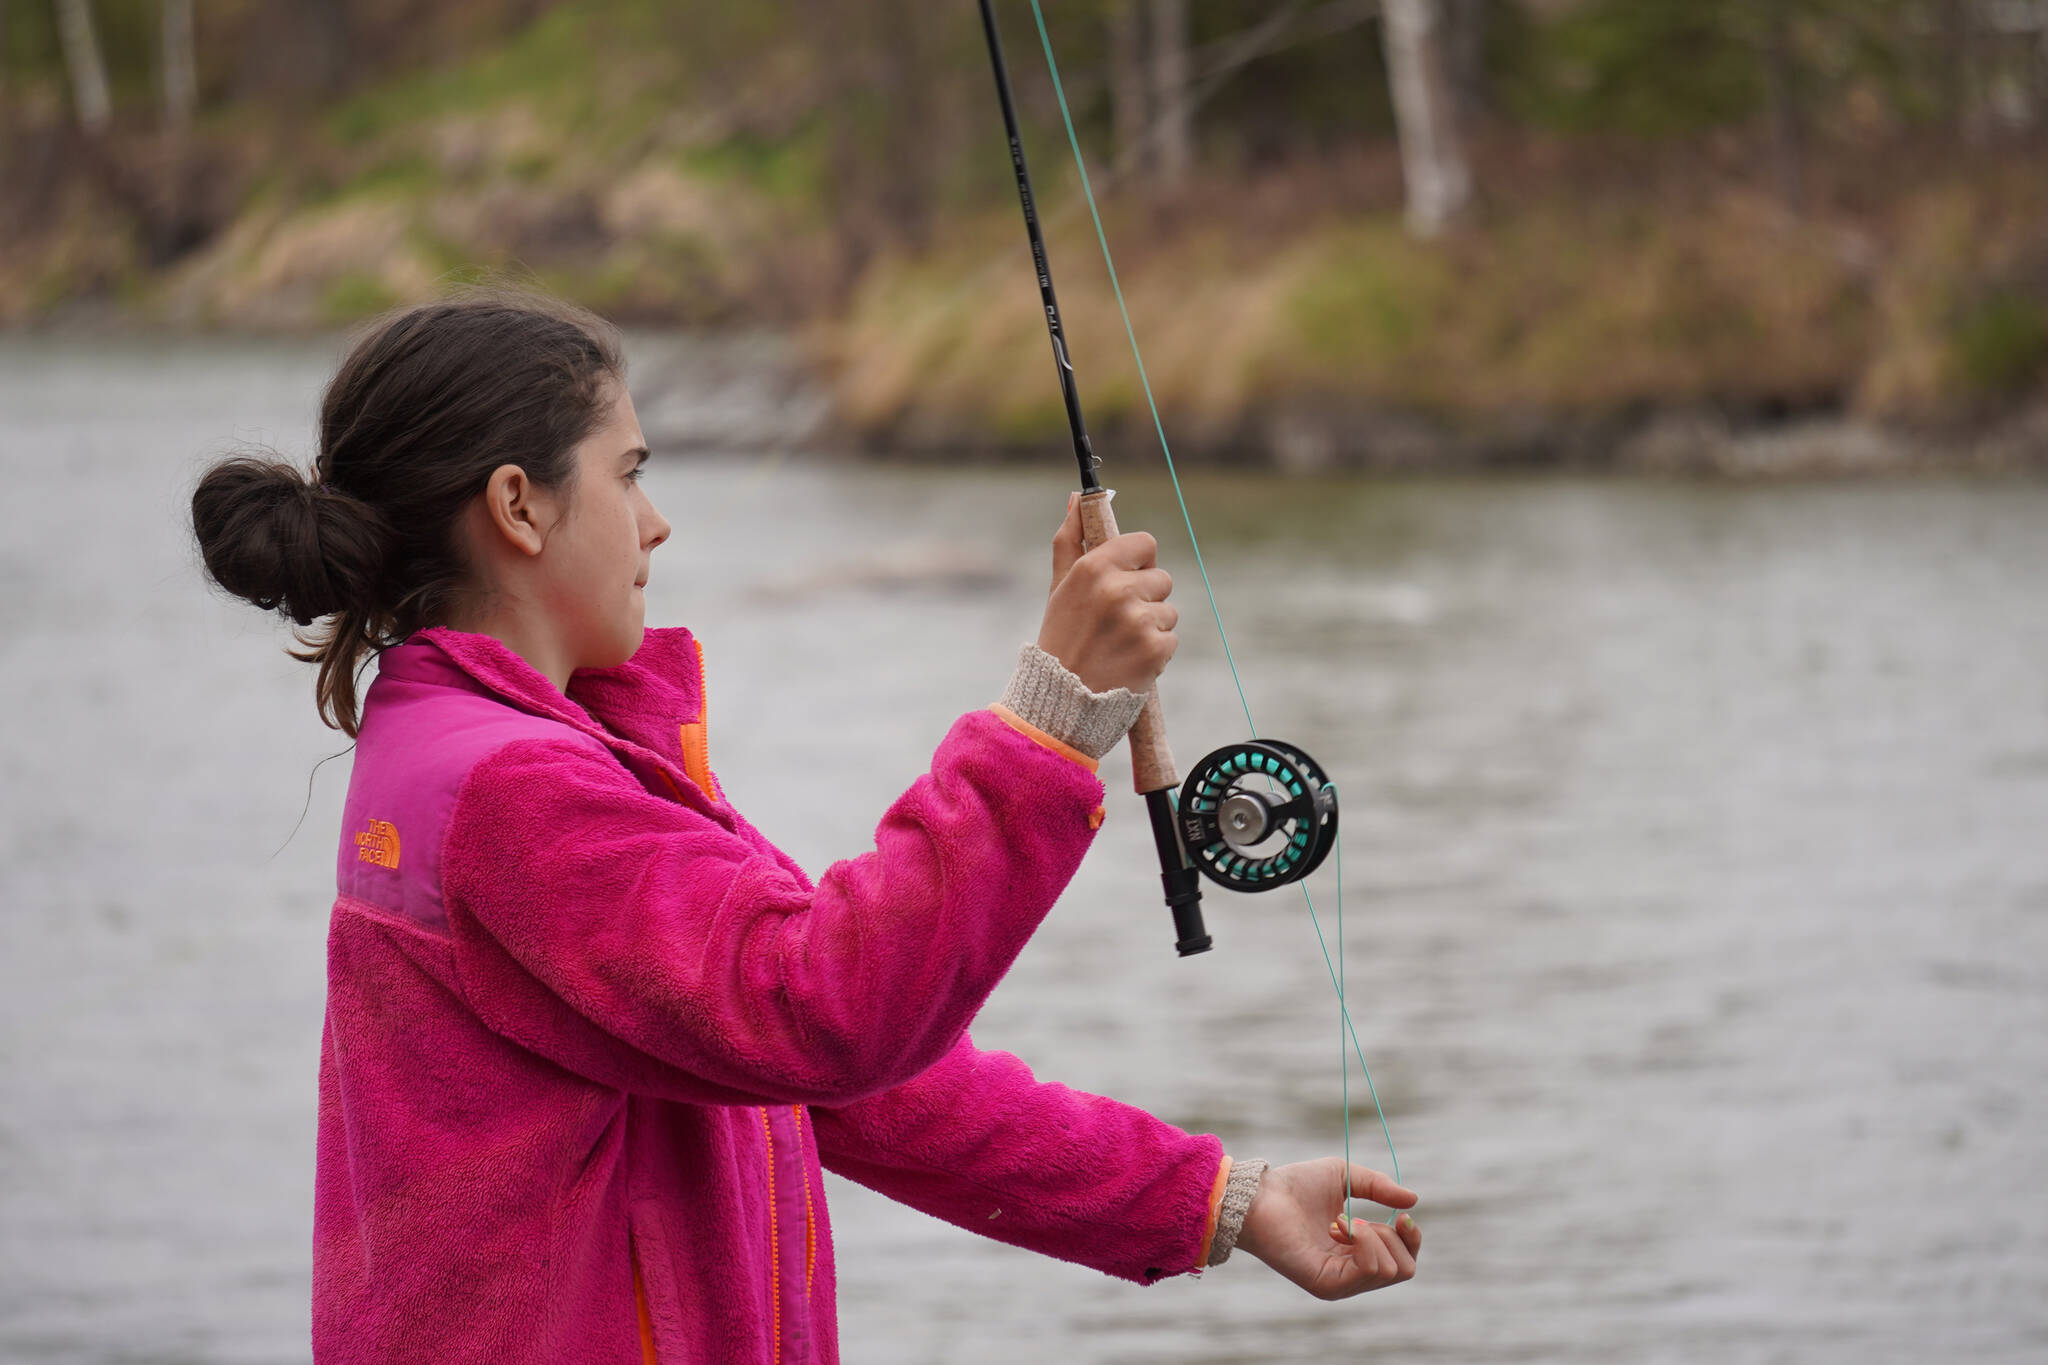 Aviana Stroh practices fly casting into the Kenai River during a kids camp put on by Trout Unlimited on Wednesday, May 24, 2023, at the Donald E. Gilman Kenai River Center in Soldotna, Alaska. (Jake Dye/Peninsula Clarion)